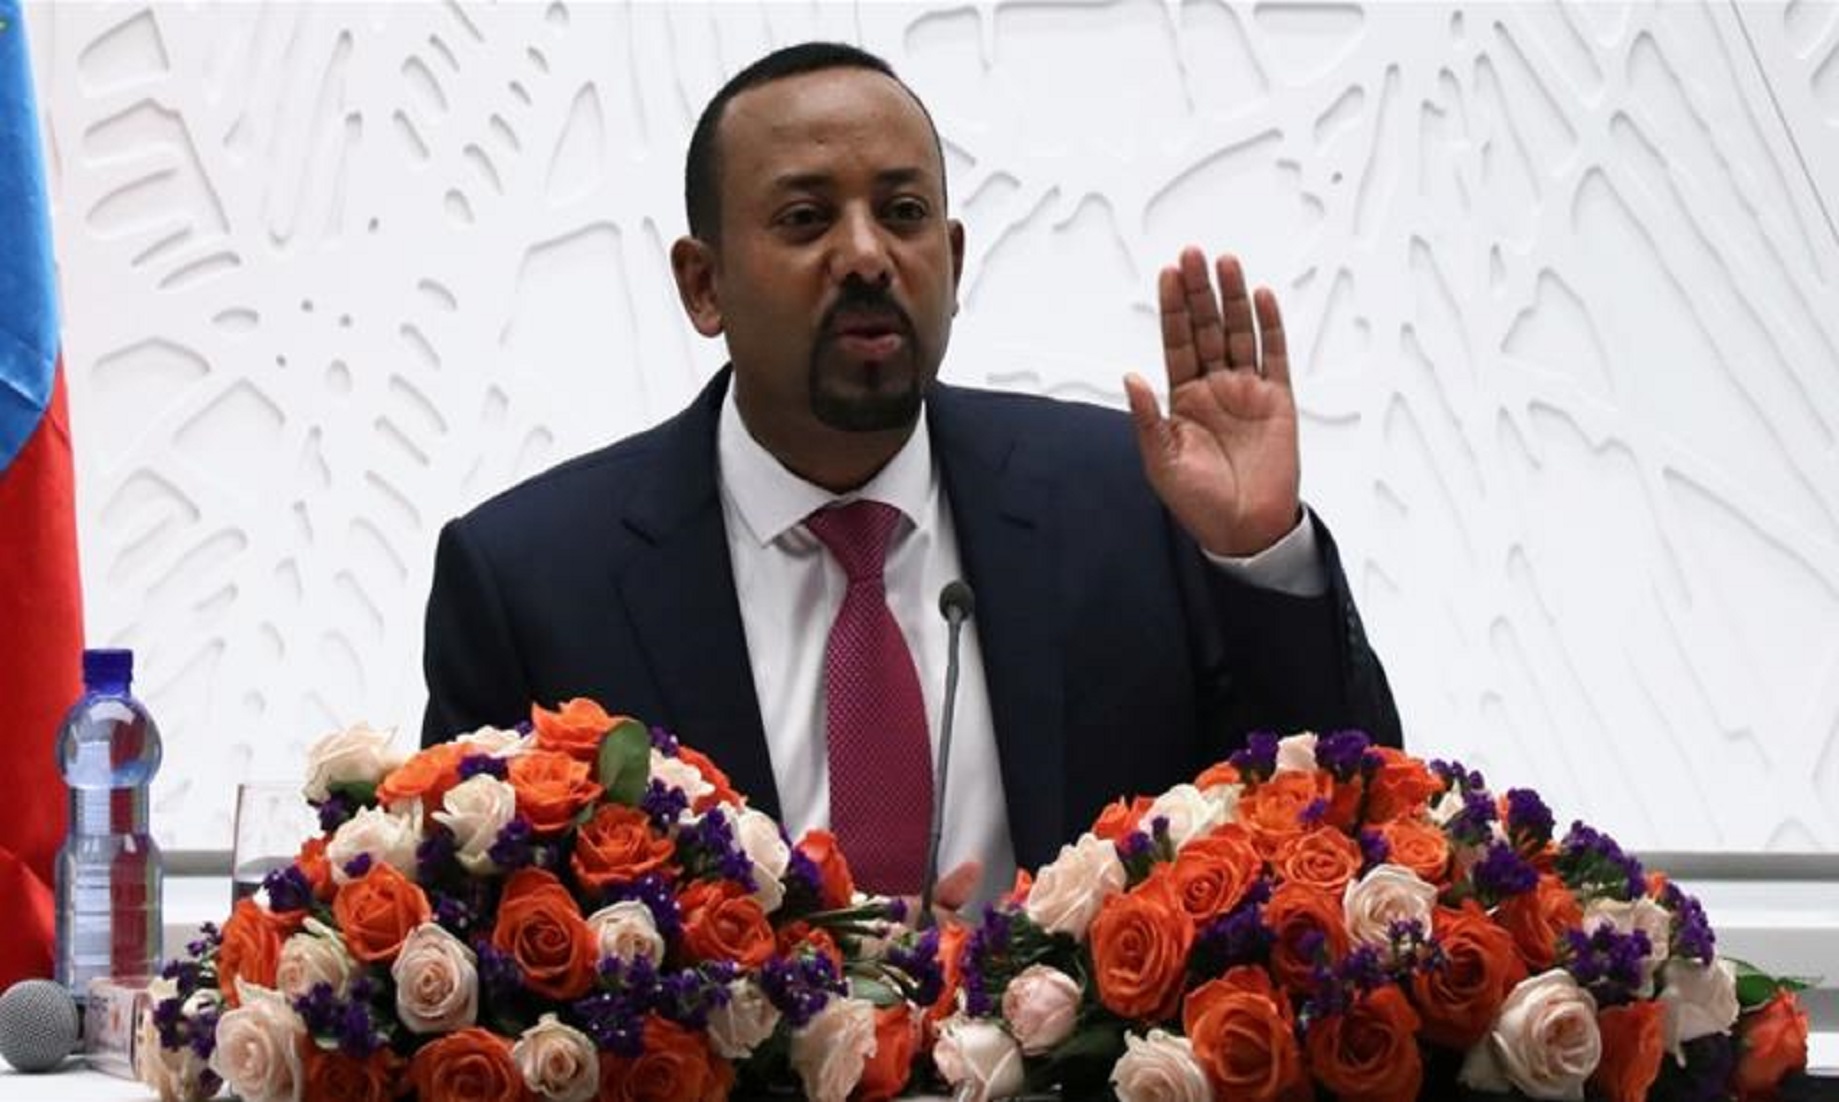 Covid-19: Ethiopian PM Abiy Ahmed’s term extended because of coronavirus